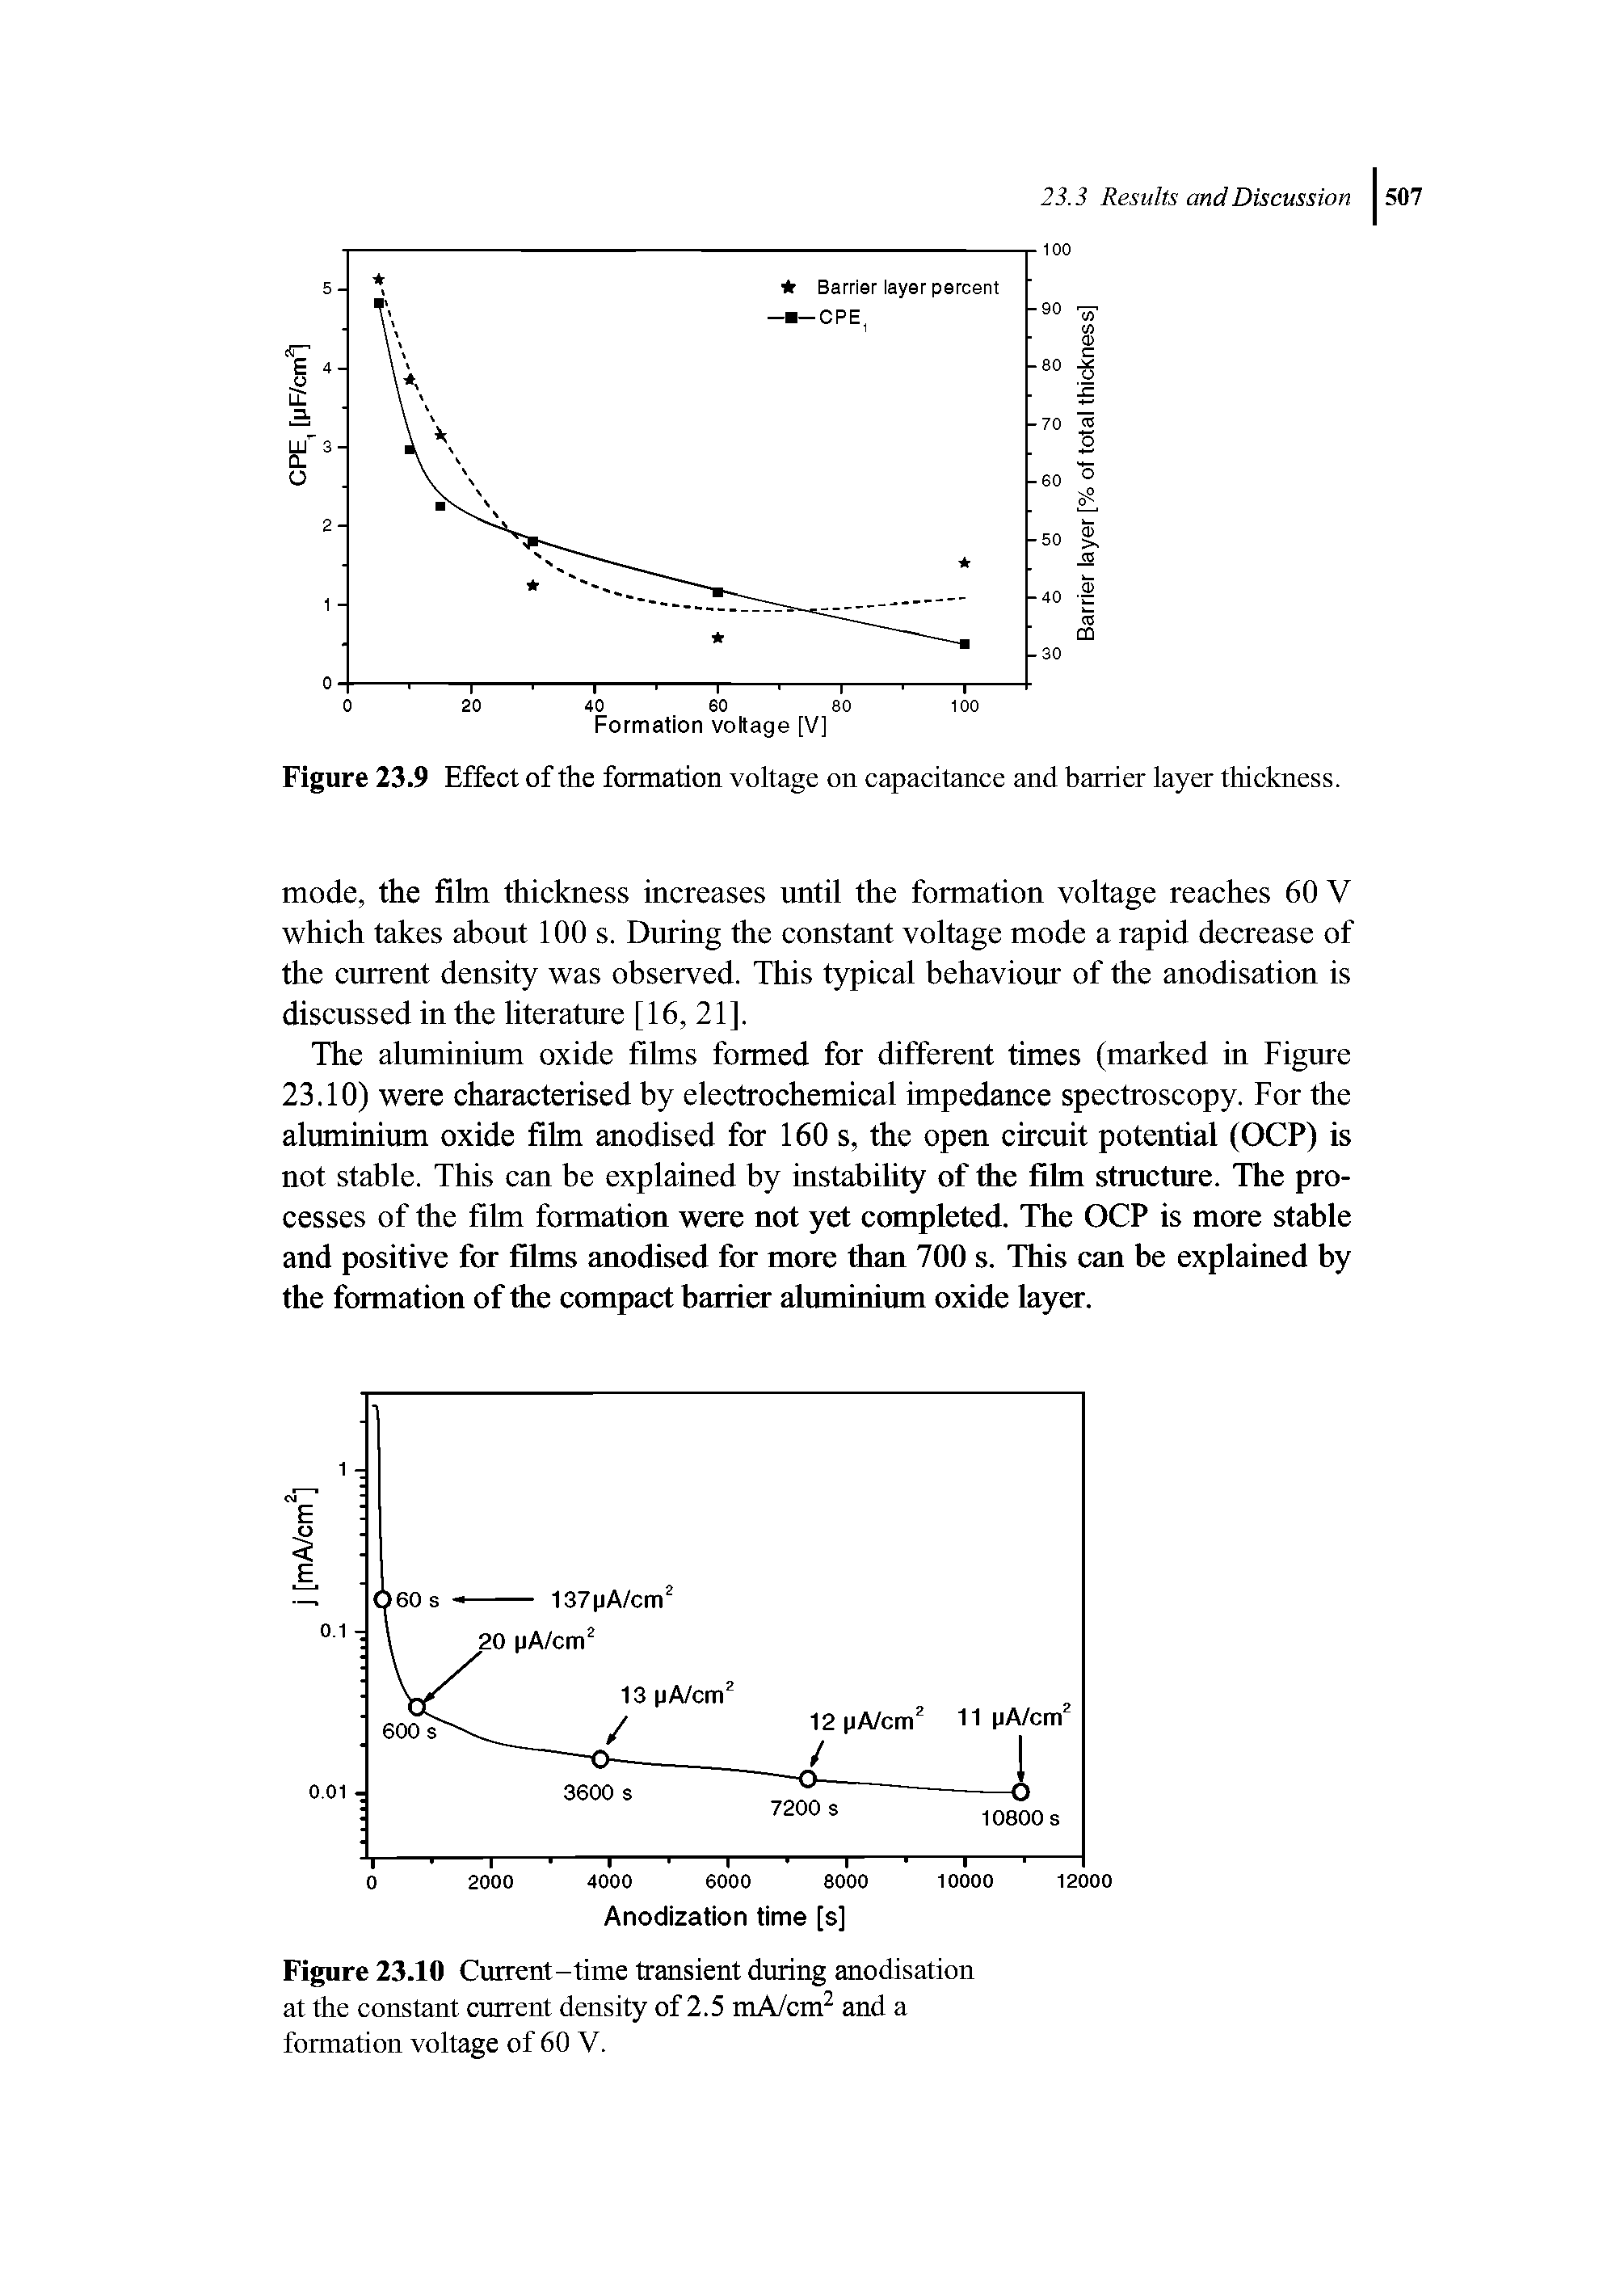 Figure 23.9 Effect of the formation voltage on capacitance and barrier layer thickness.